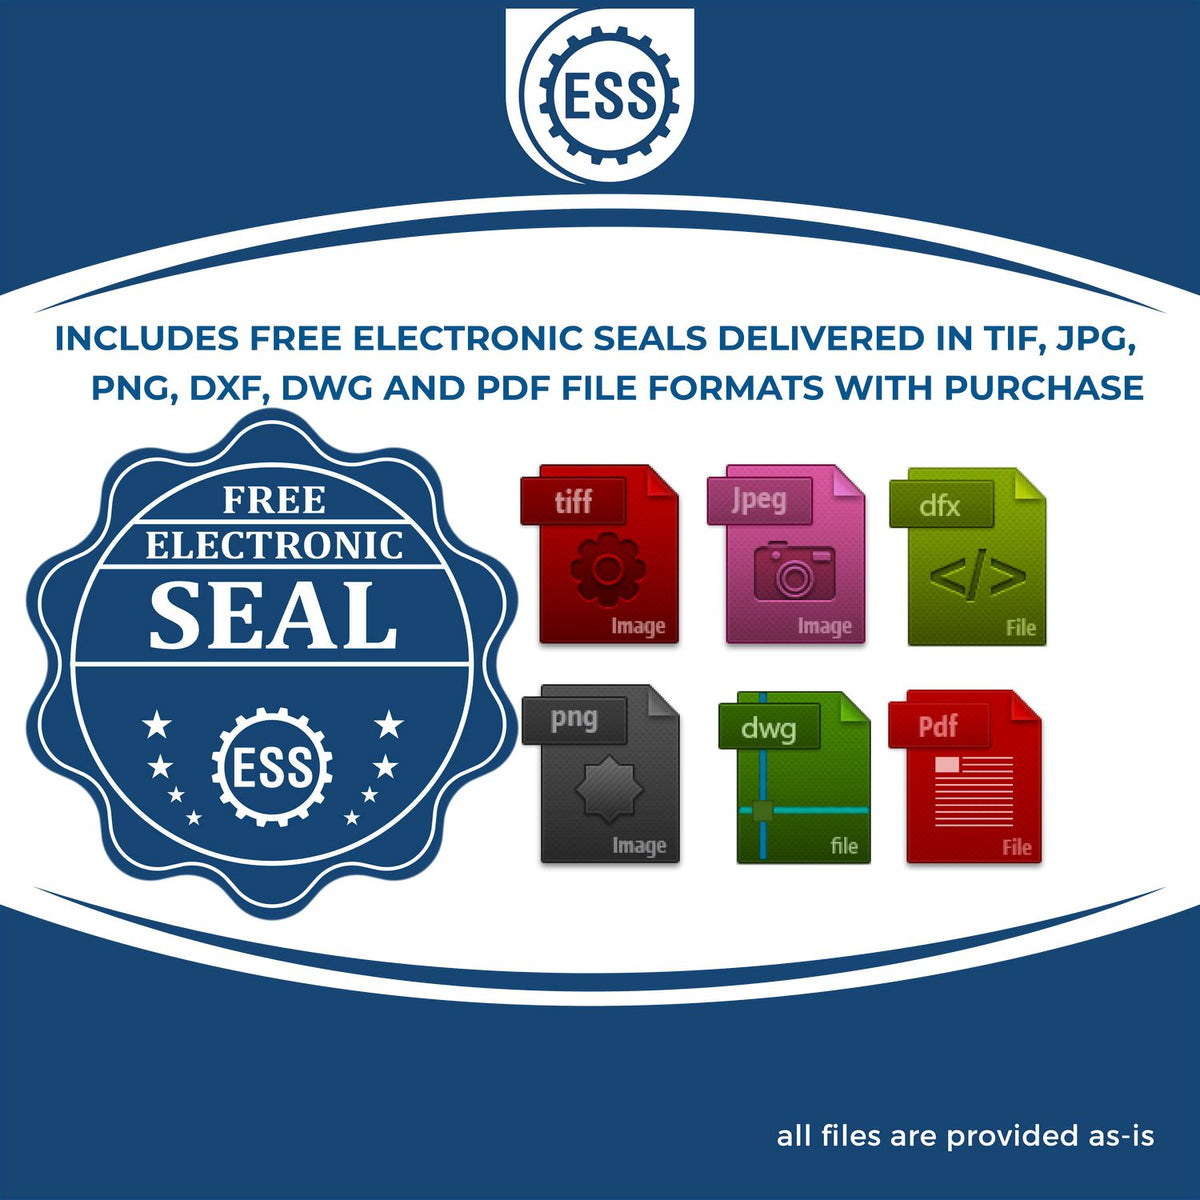 An infographic for the free electronic seal for the Slim Pre-Inked Massachusetts Land Surveyor Seal Stamp illustrating the different file type icons such as DXF, DWG, TIF, JPG and PNG.